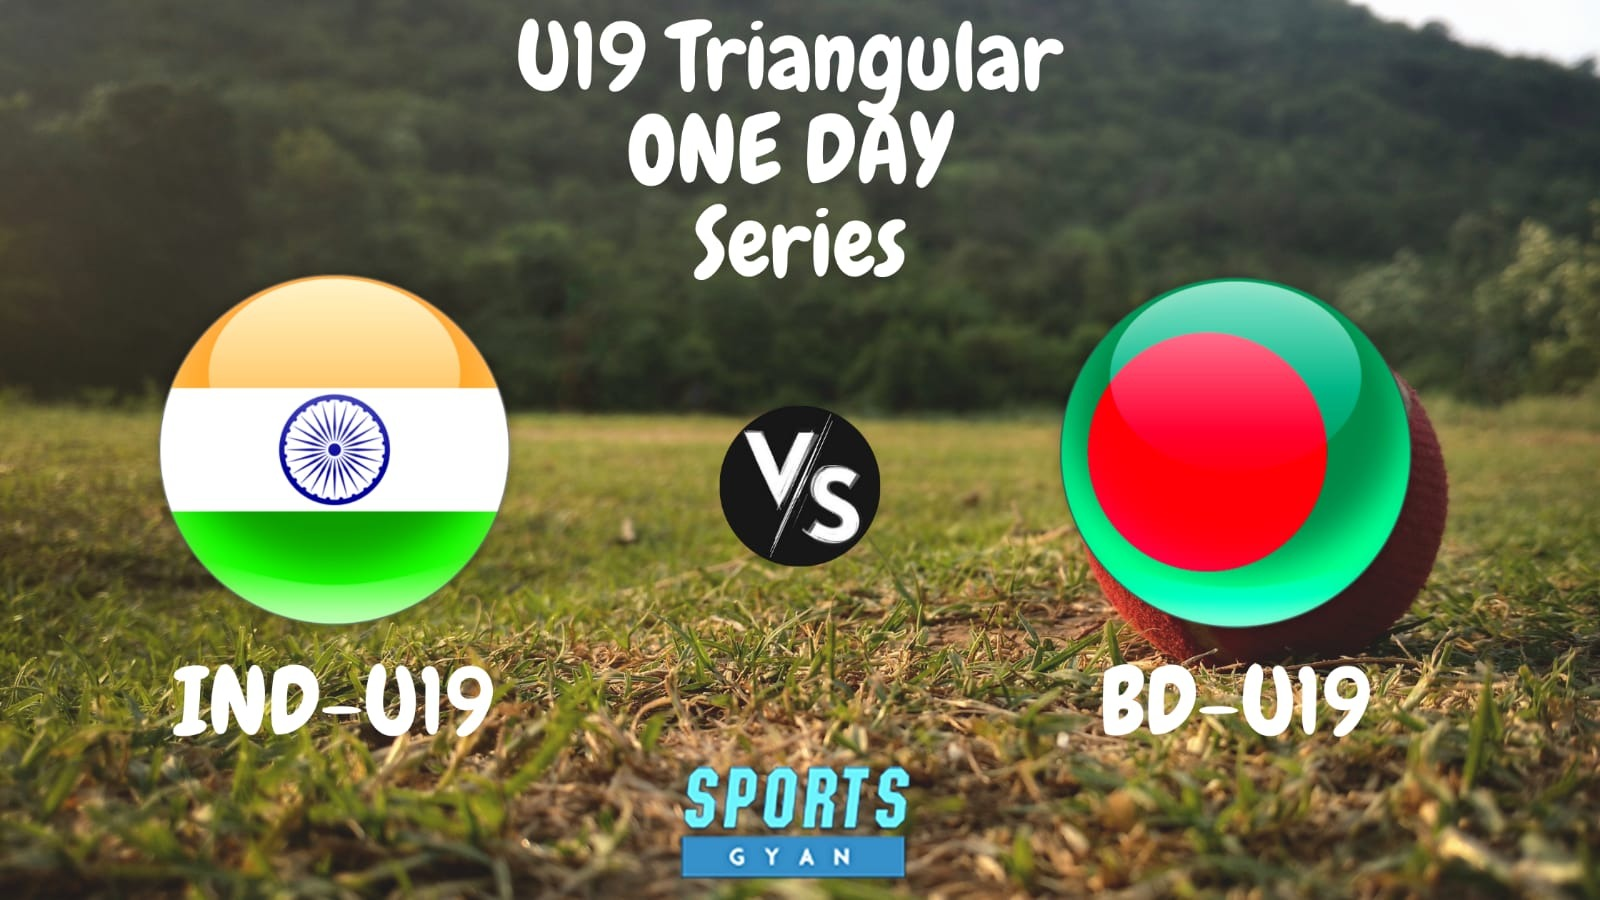 IND B U19 vs BD-U19 Dream11 Prediction Player Stats, Today’s Playing 11, Pitch Report and Injury Update